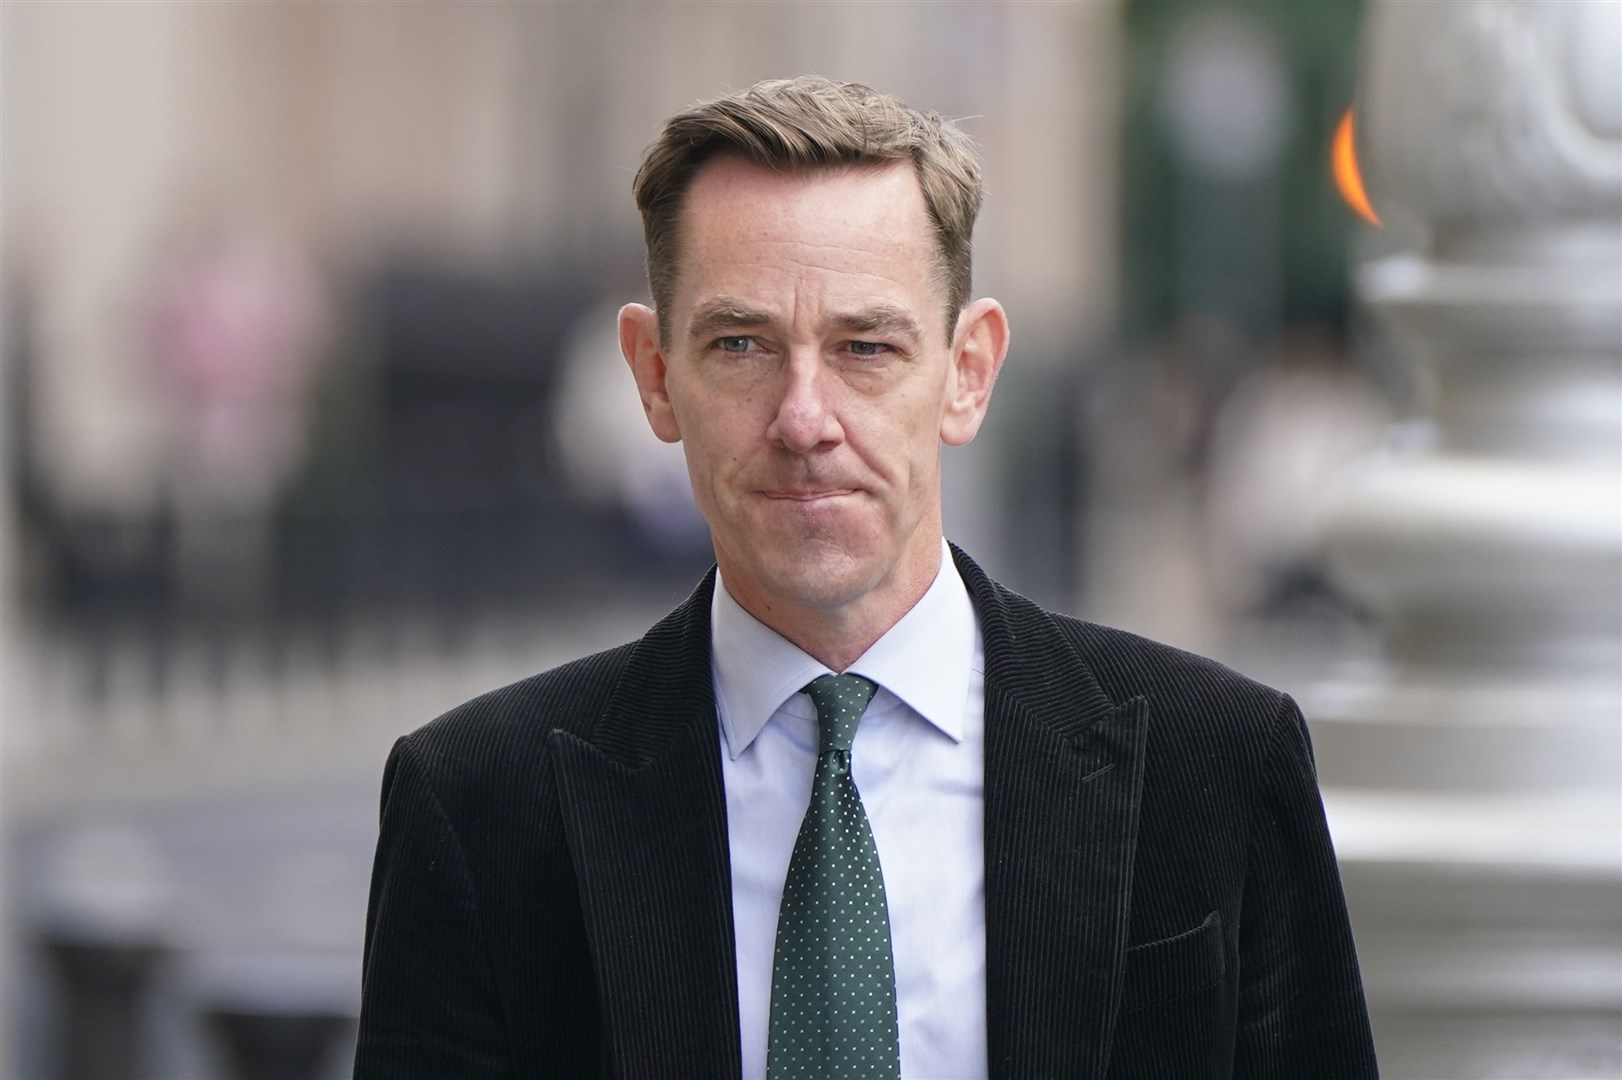 Ryan Tubridy received undeclared payments from RTE (Niall Carson/PA)